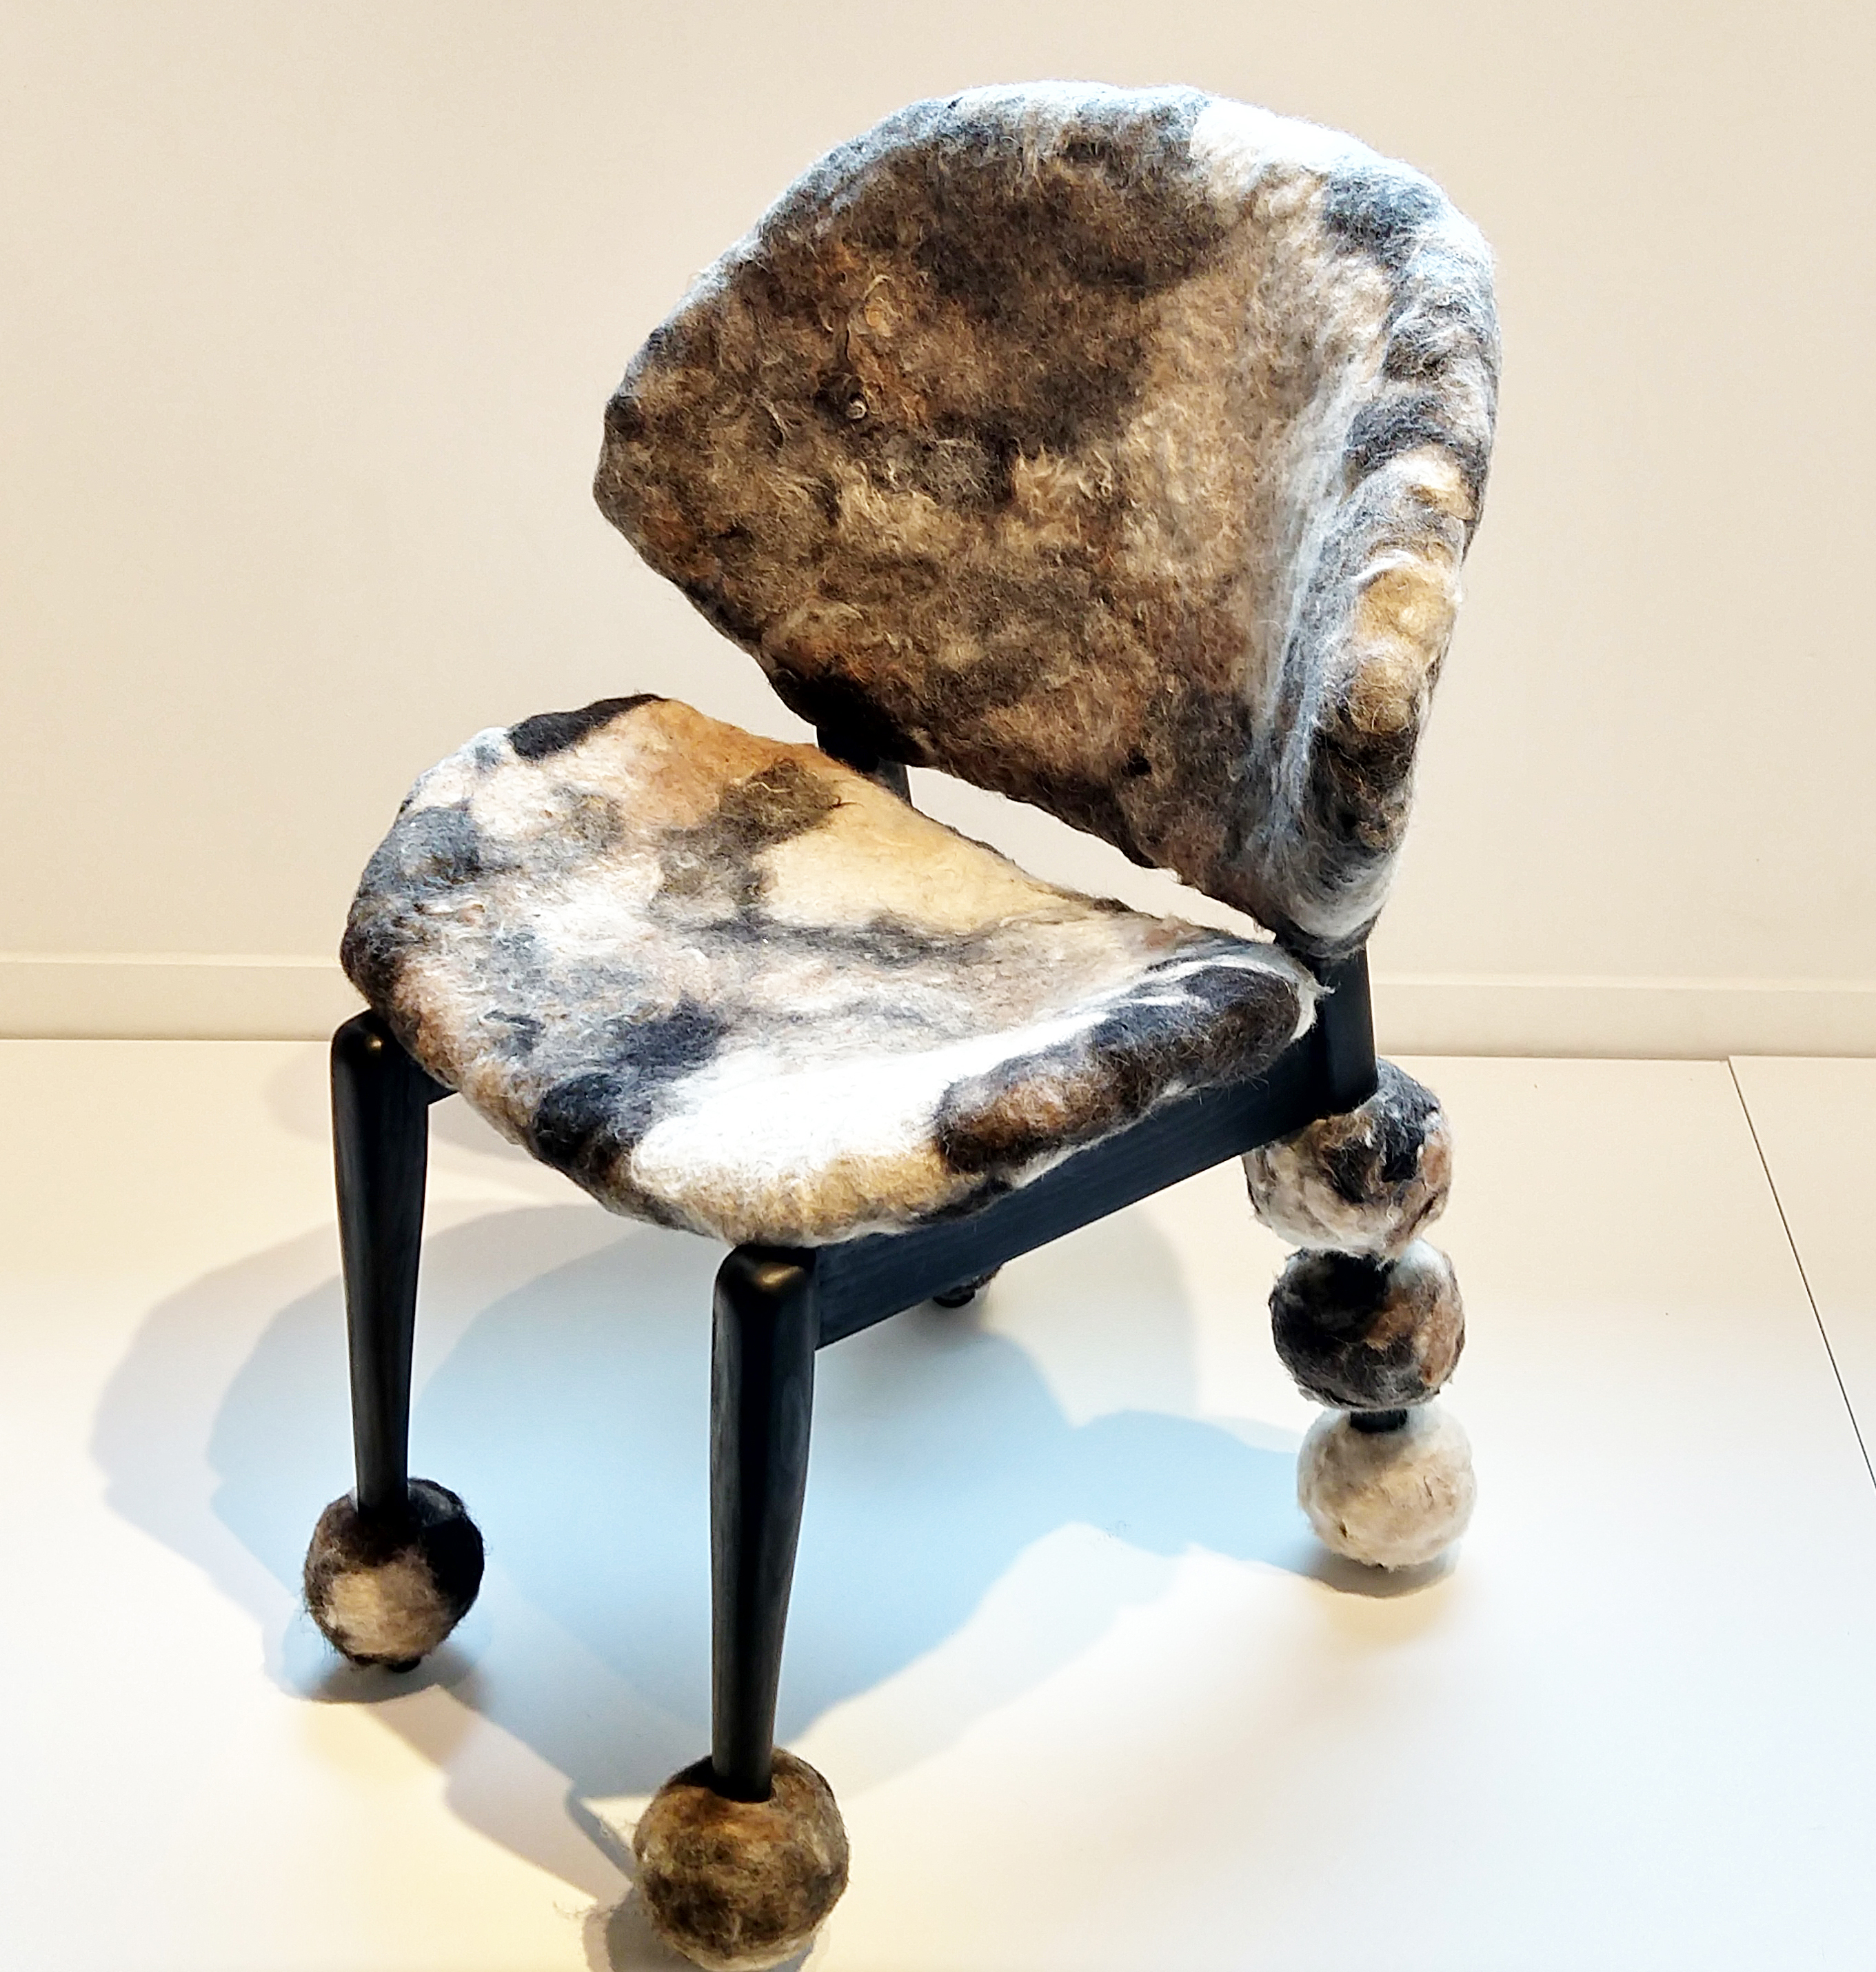 Hair of the Dog by Hali Barthel 20 FD is made from felted dog hair